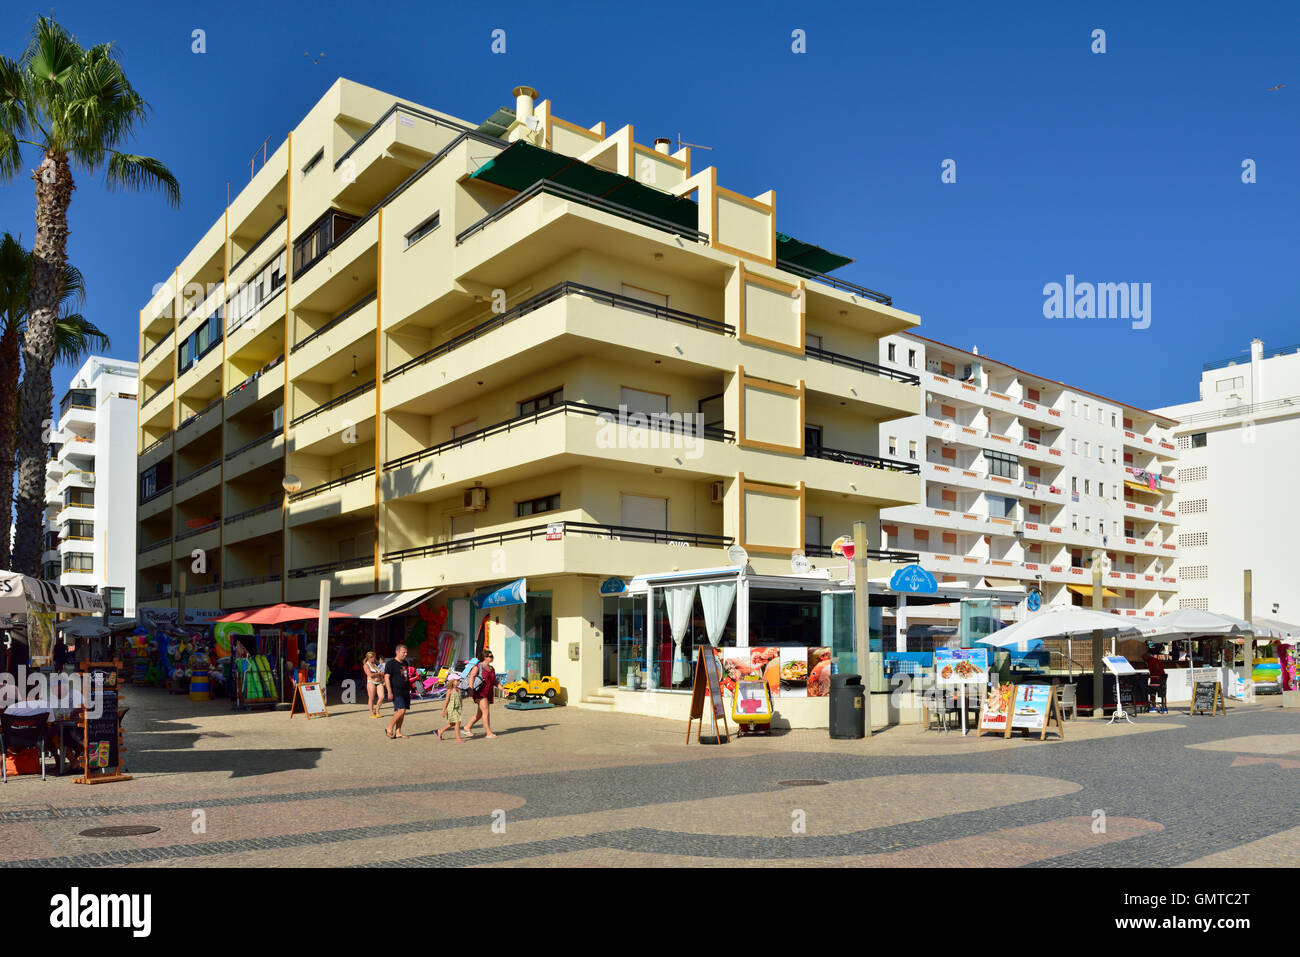 Seafront shops, cafes, hotels and apartments in Quarteira, Algarve, south Portugal Stock Photo